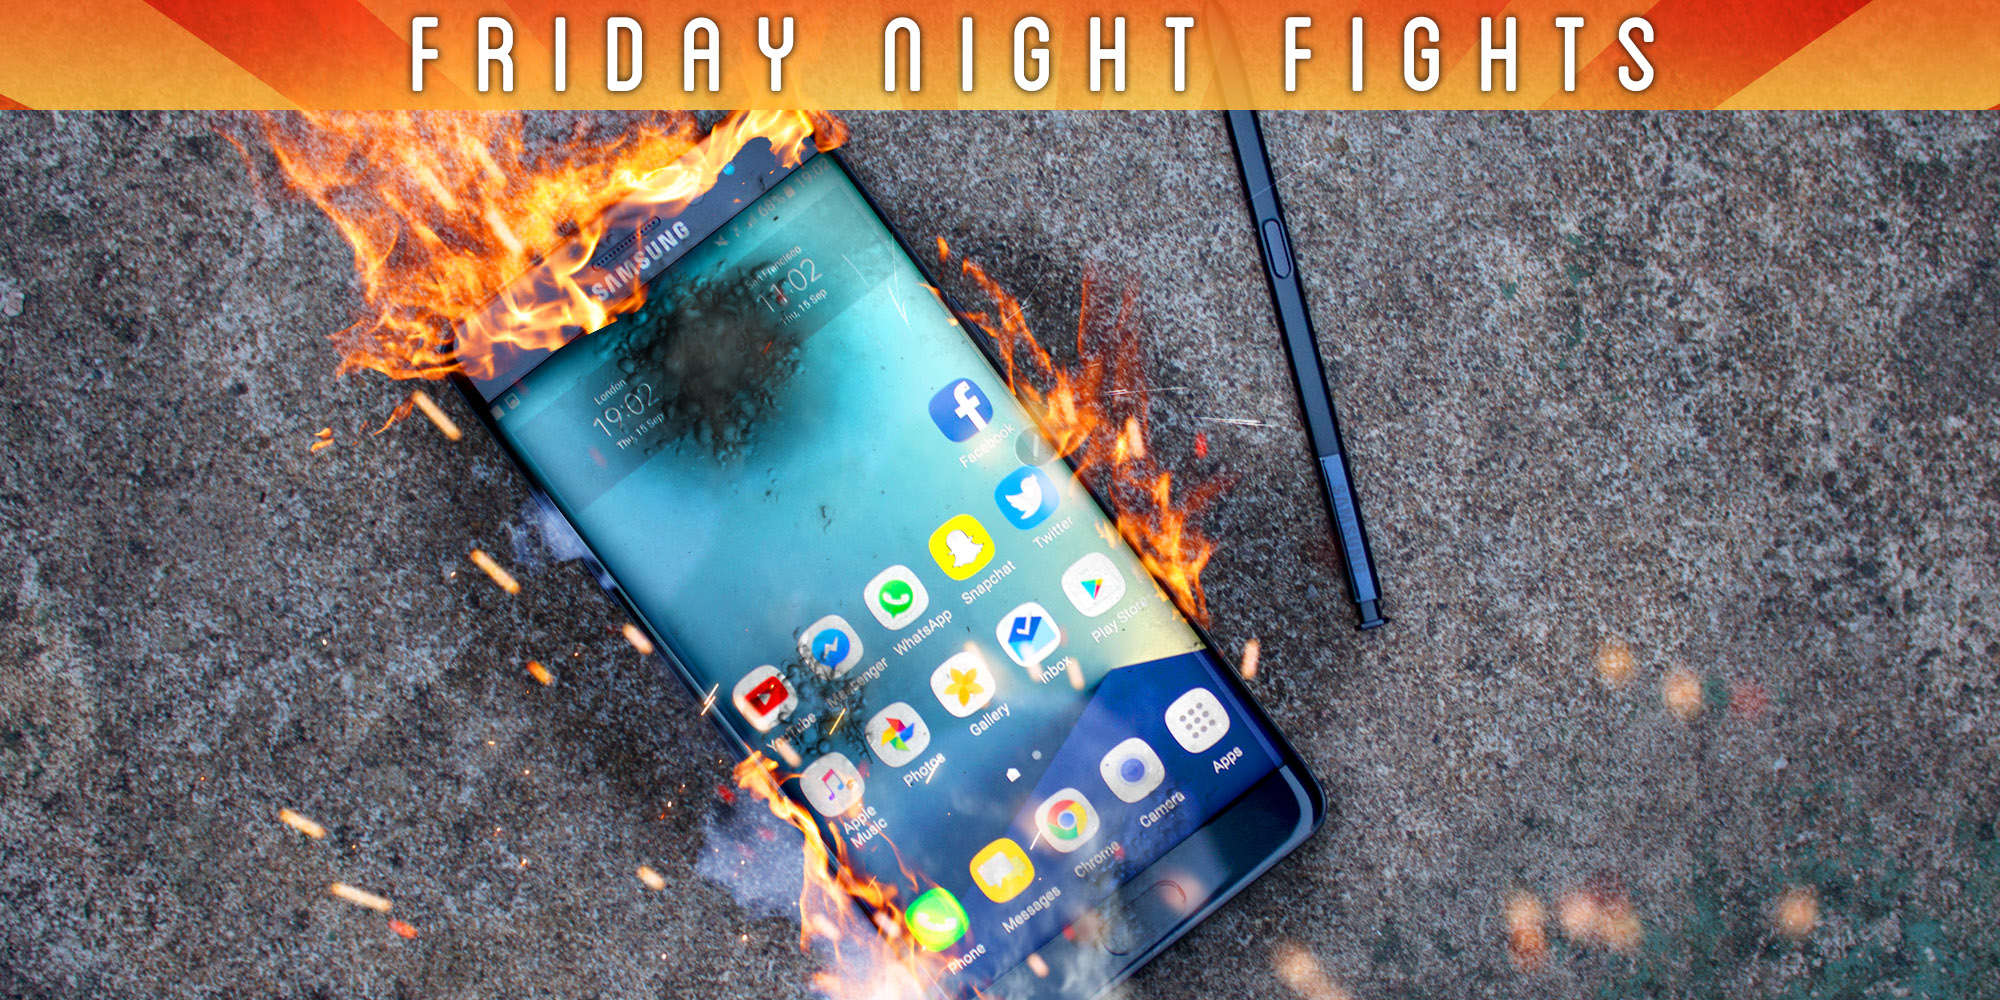 Galaxy Note 7 on fire